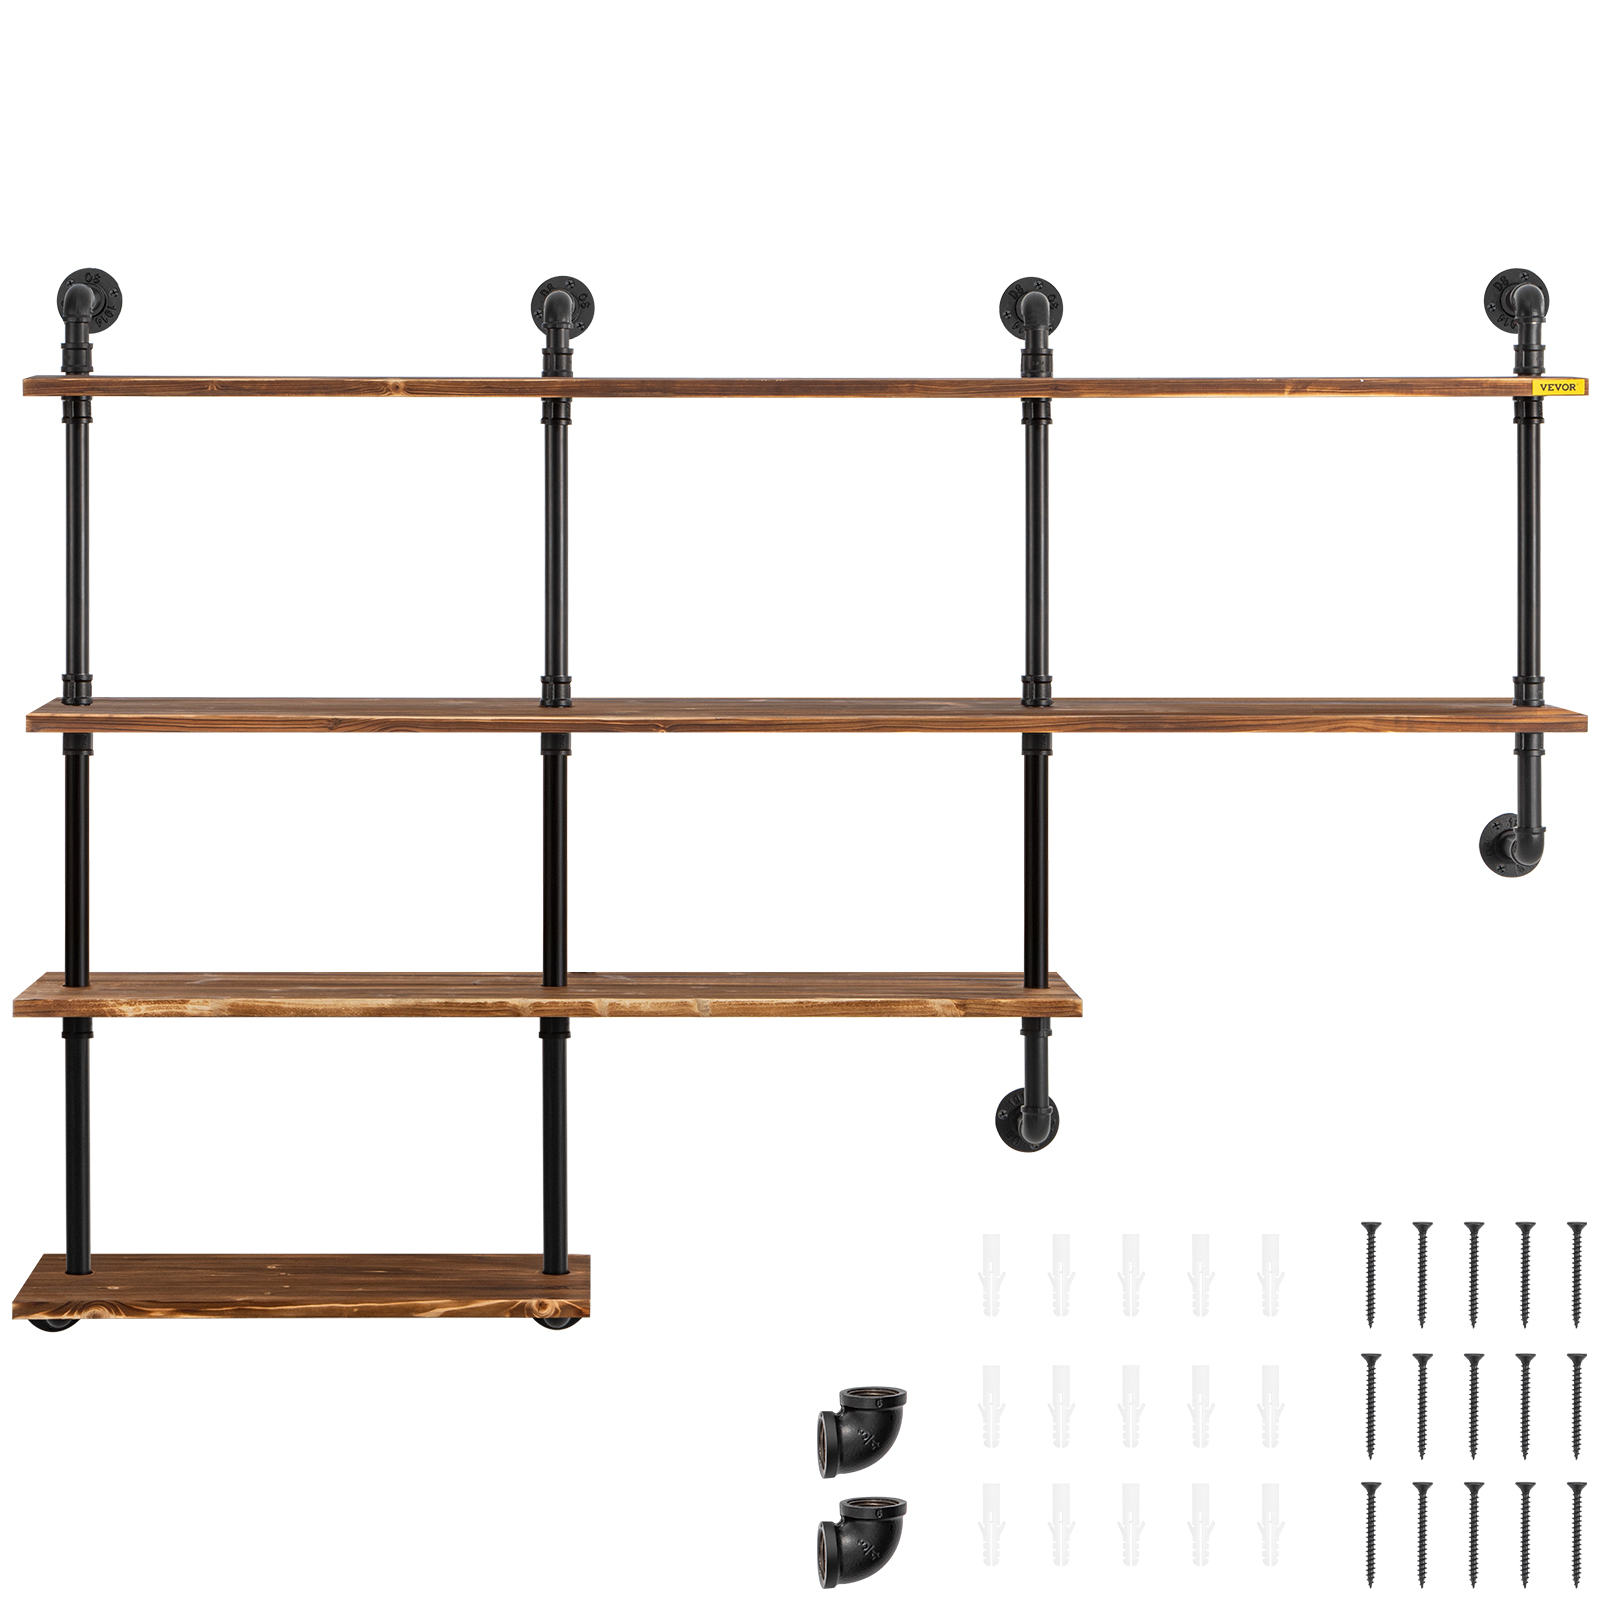 Pipe Decor 36 Wall Mounted Clothing Rack with Wood Shelf and Industrial Steel Pipe - Trail Brown